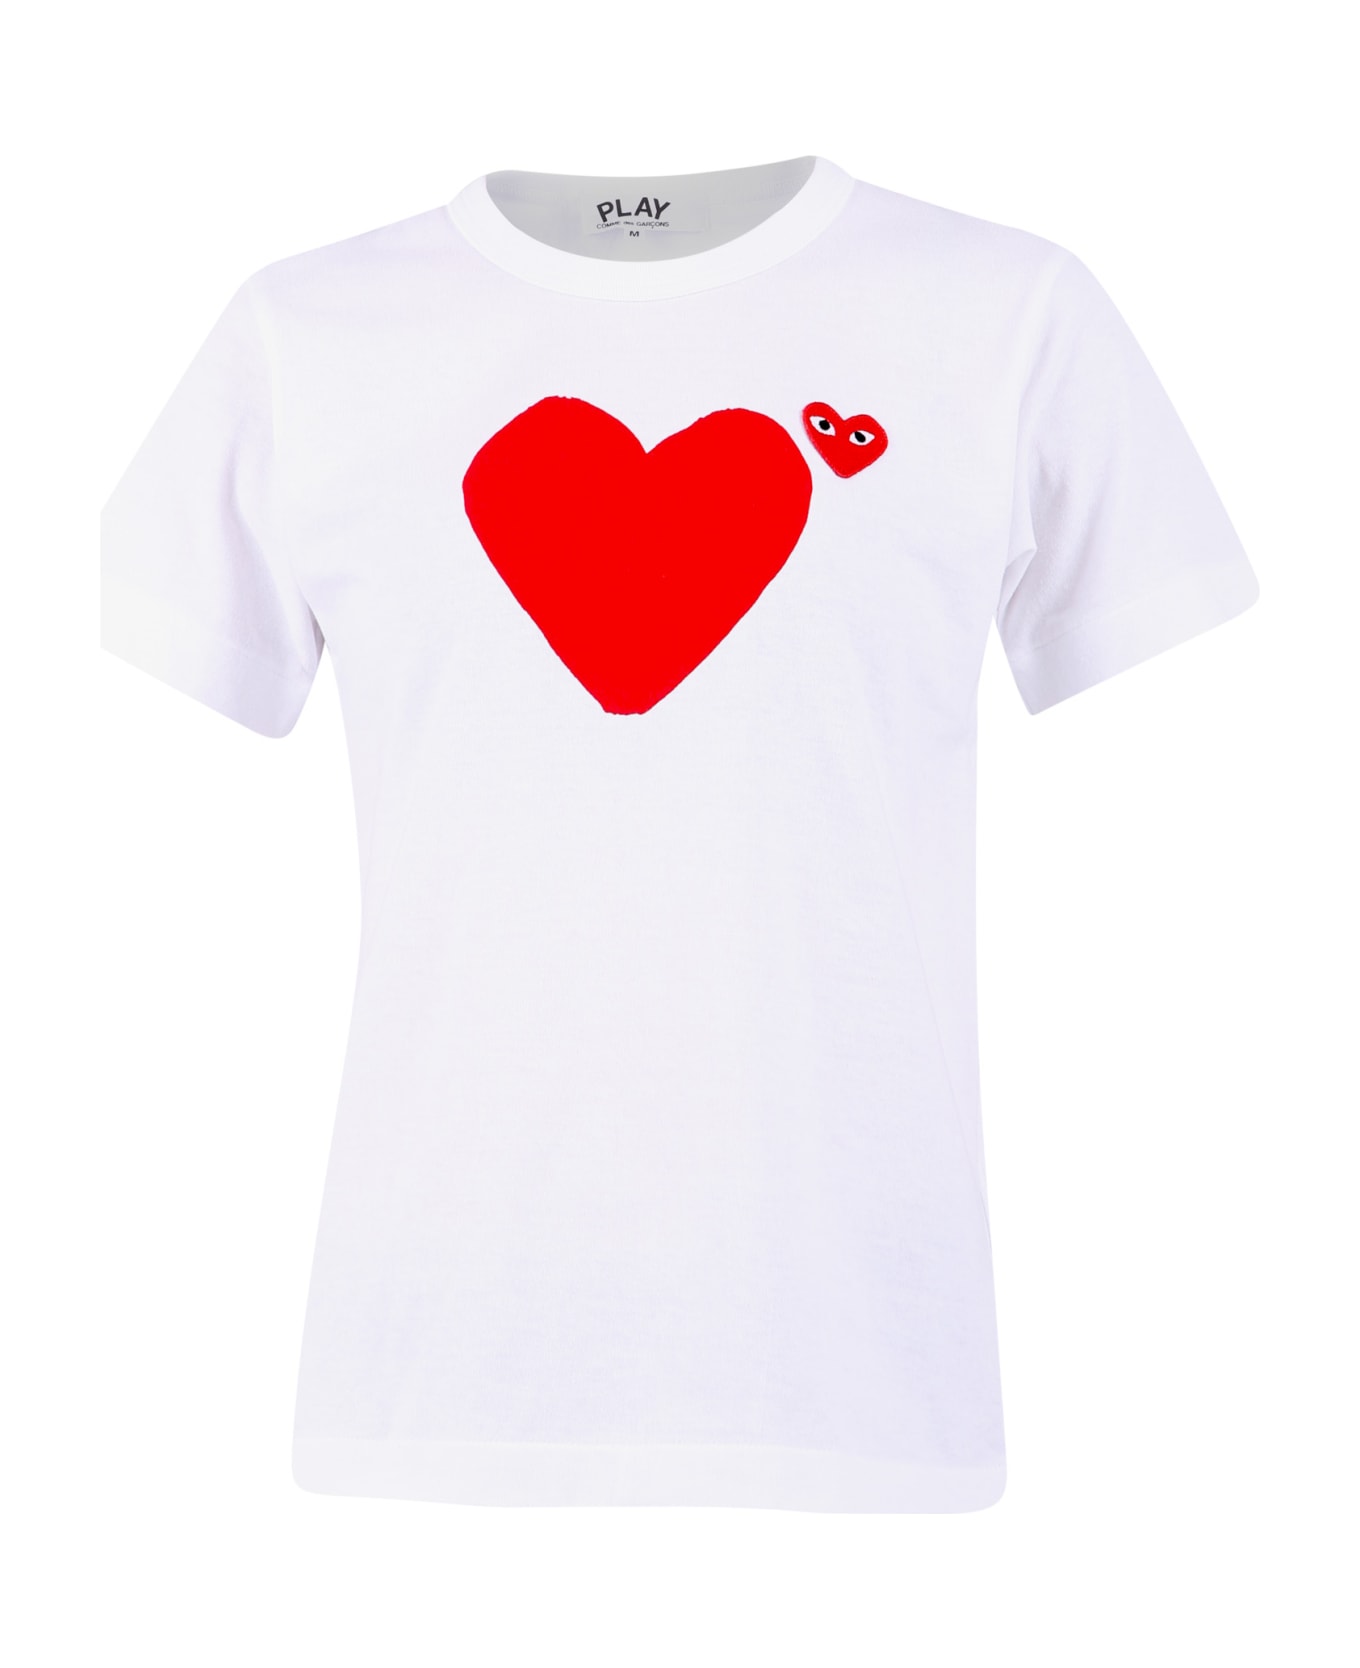 Comme des Garçons Play Embroidered T-shirt - White